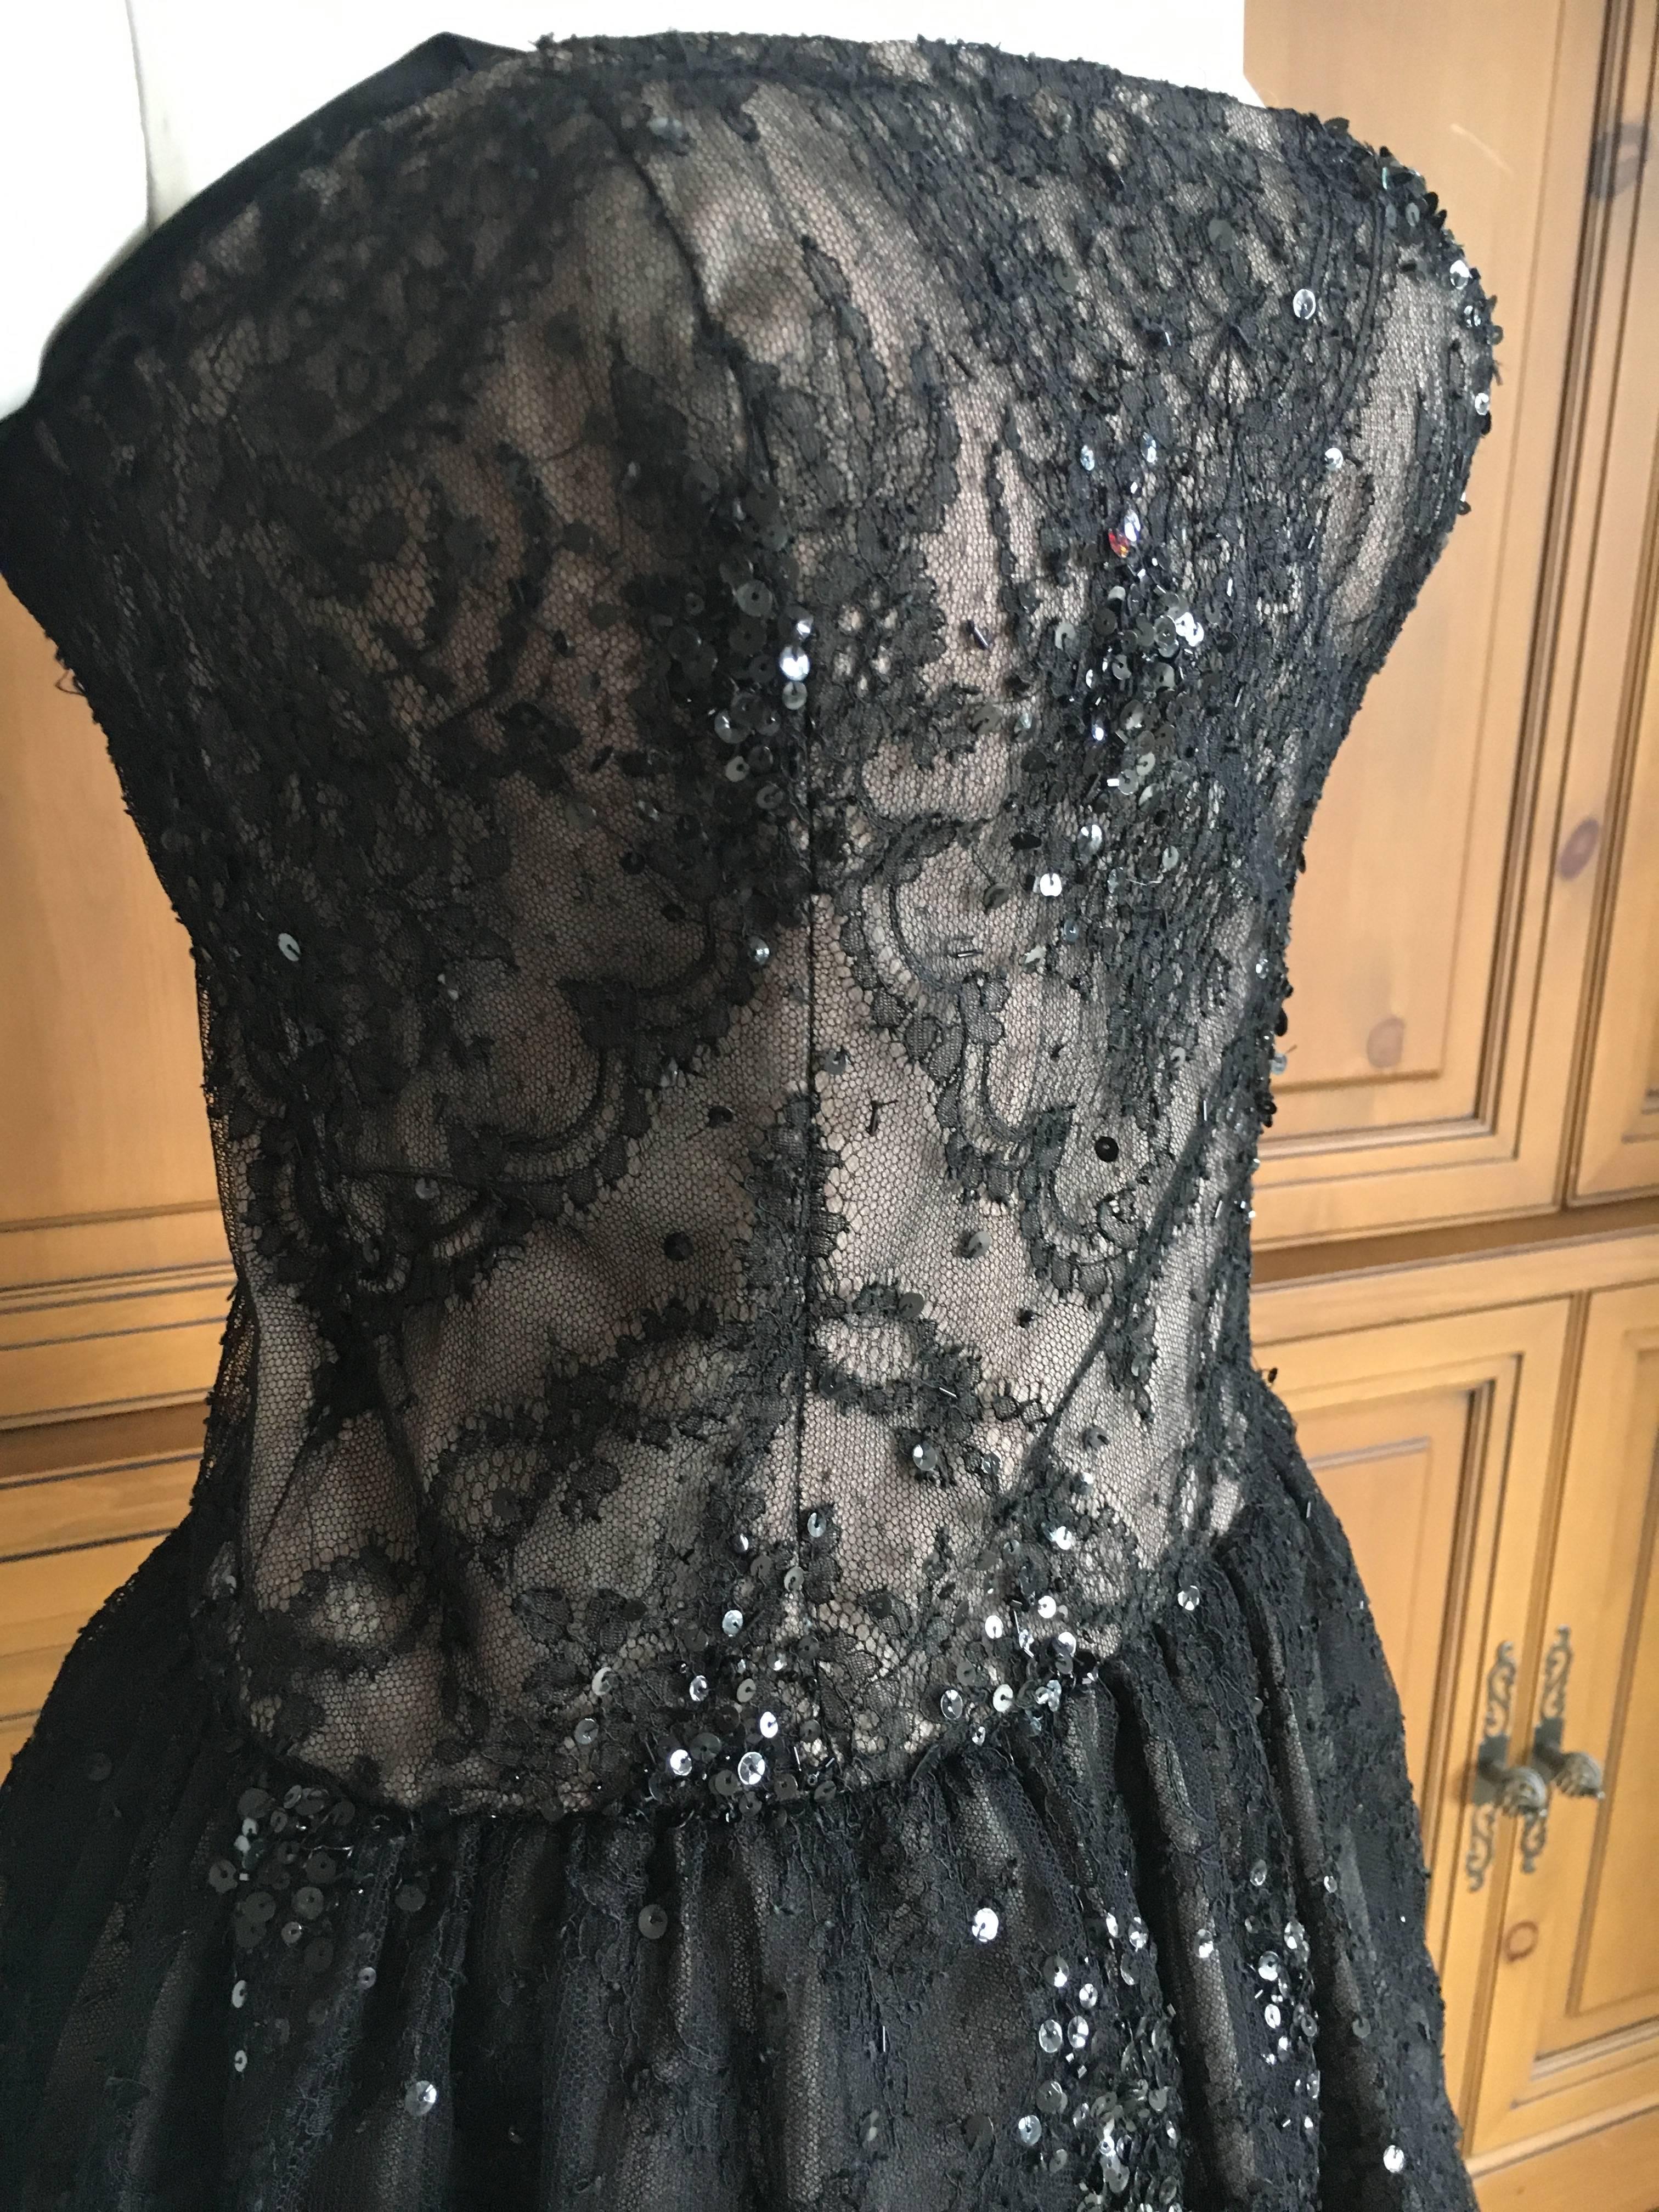 Oscar de la Renta Vintage Black Layered Lace Petal Dress.
There are two satin ribbon shoulder strap's , but I think they were added, not original to the dress.
Size 4
Measurements to follow